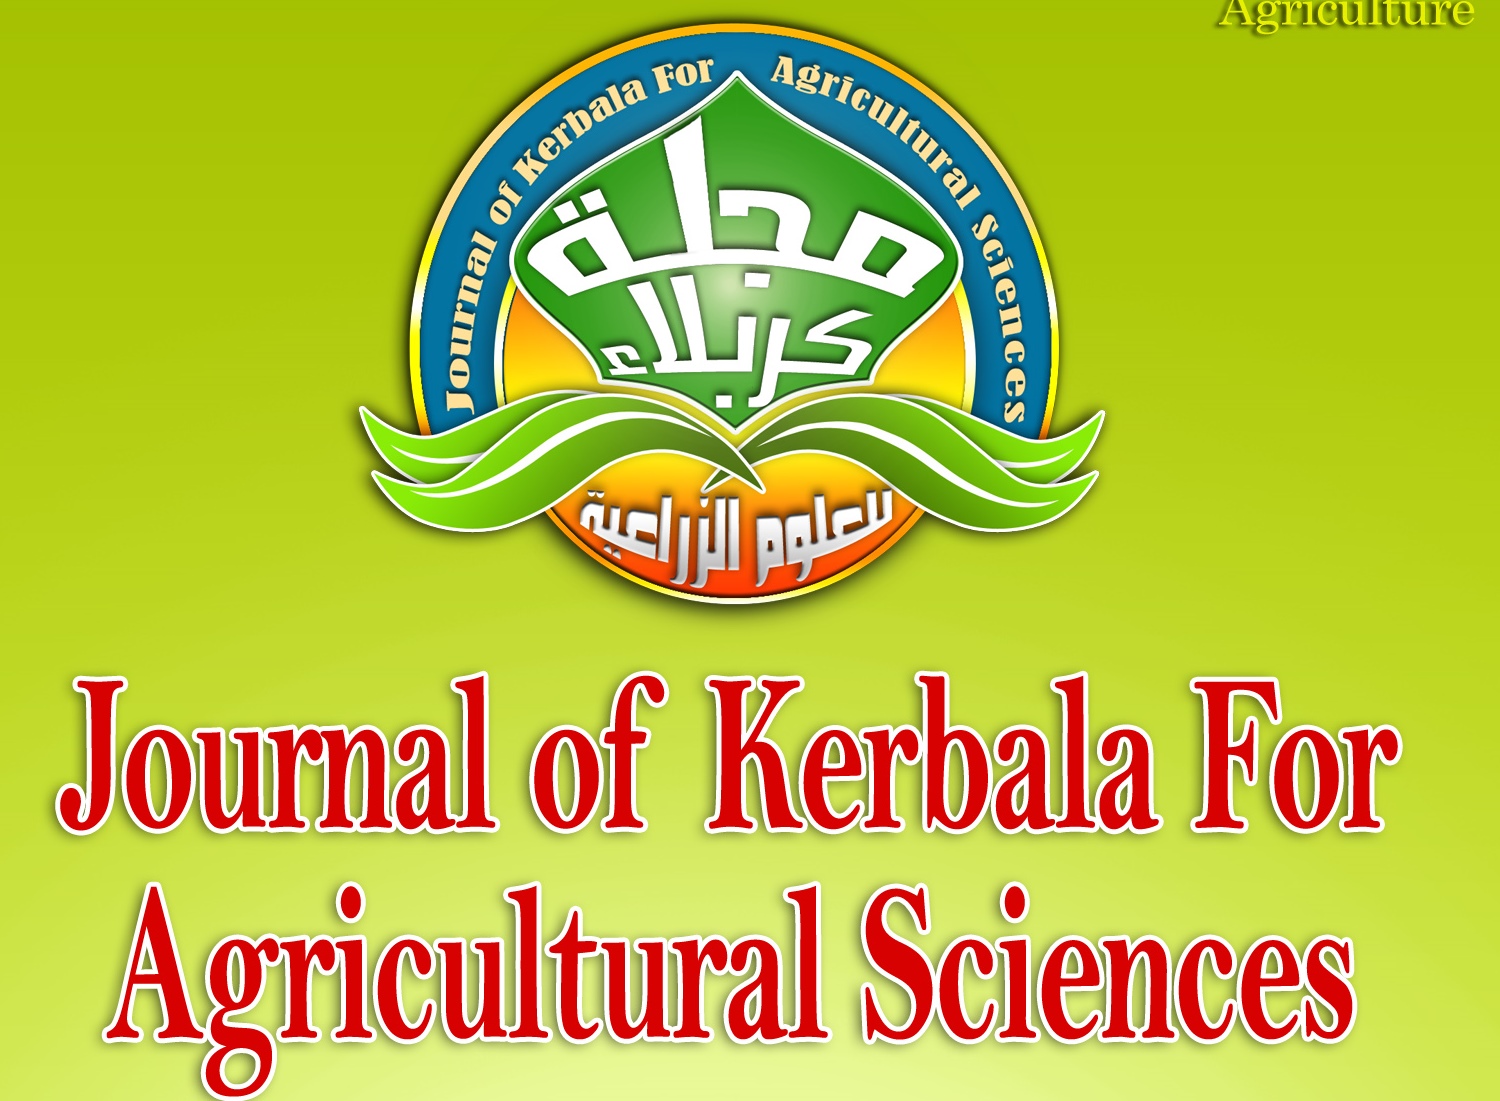 Journal of Kerbala for Agricultural Sciences